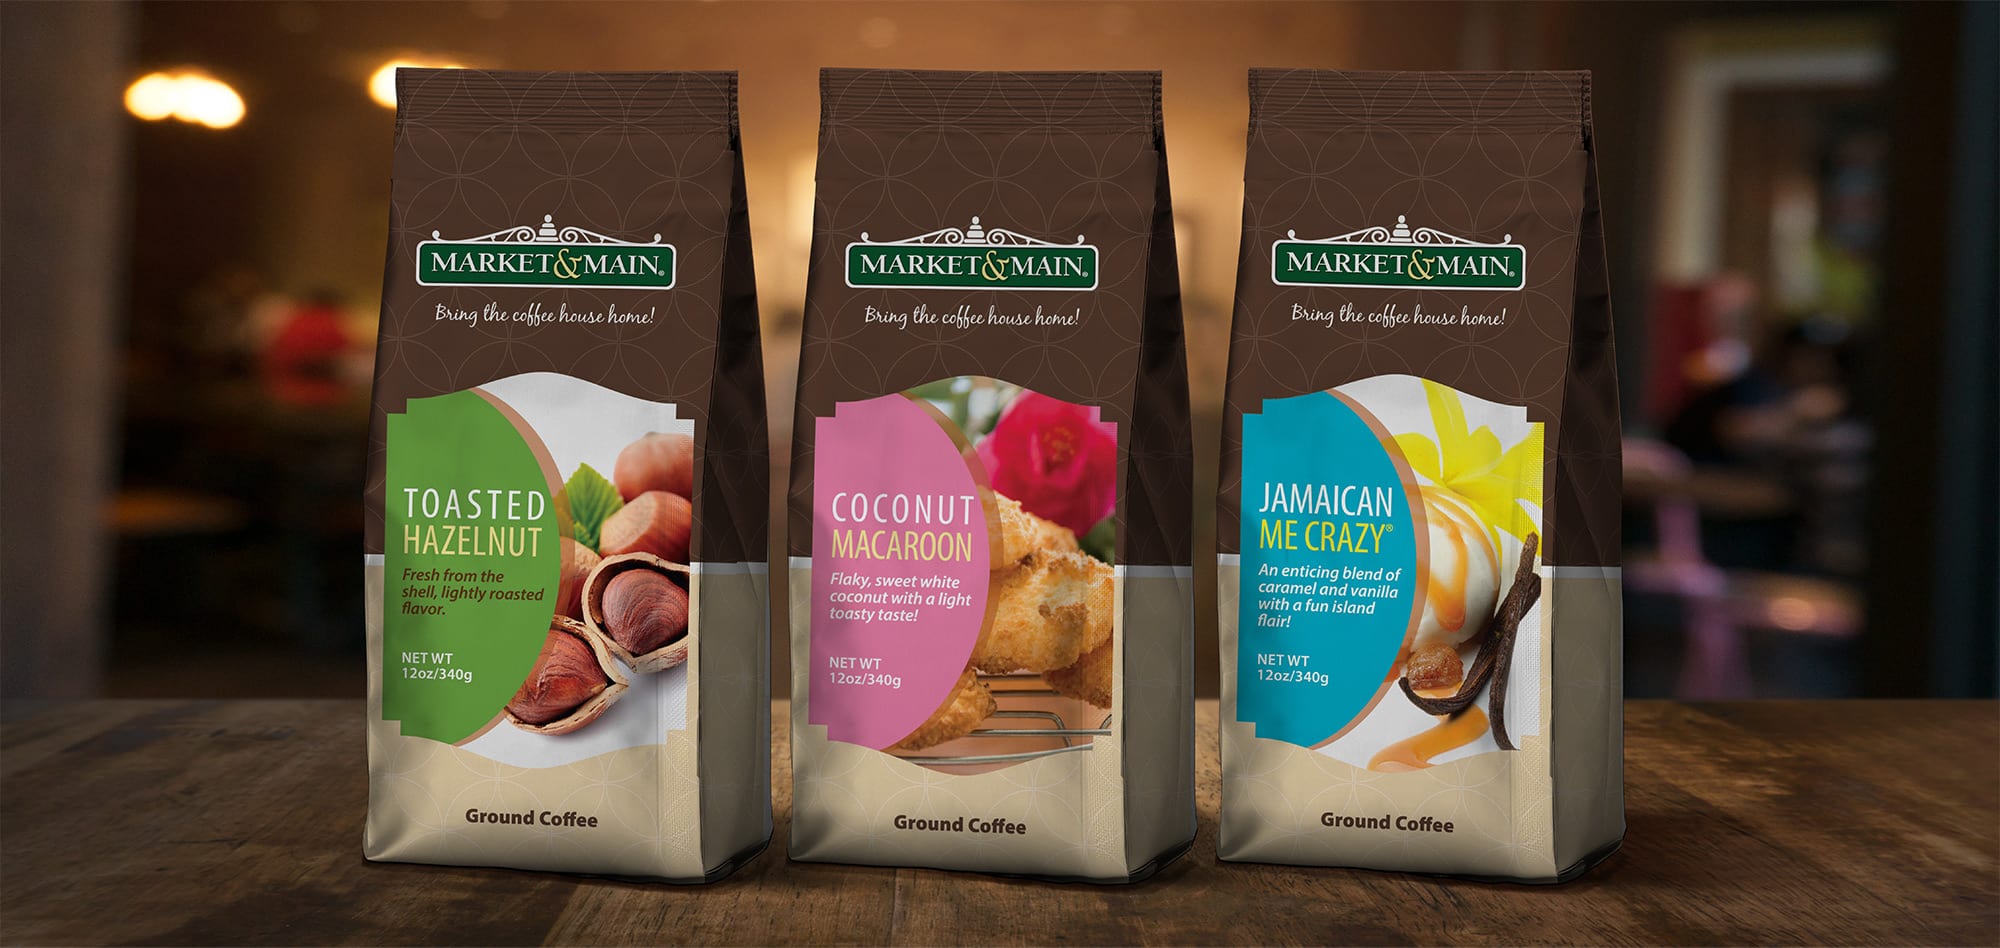 Market and Main Coffee flavors also come in 12 oz. ground coffee bags